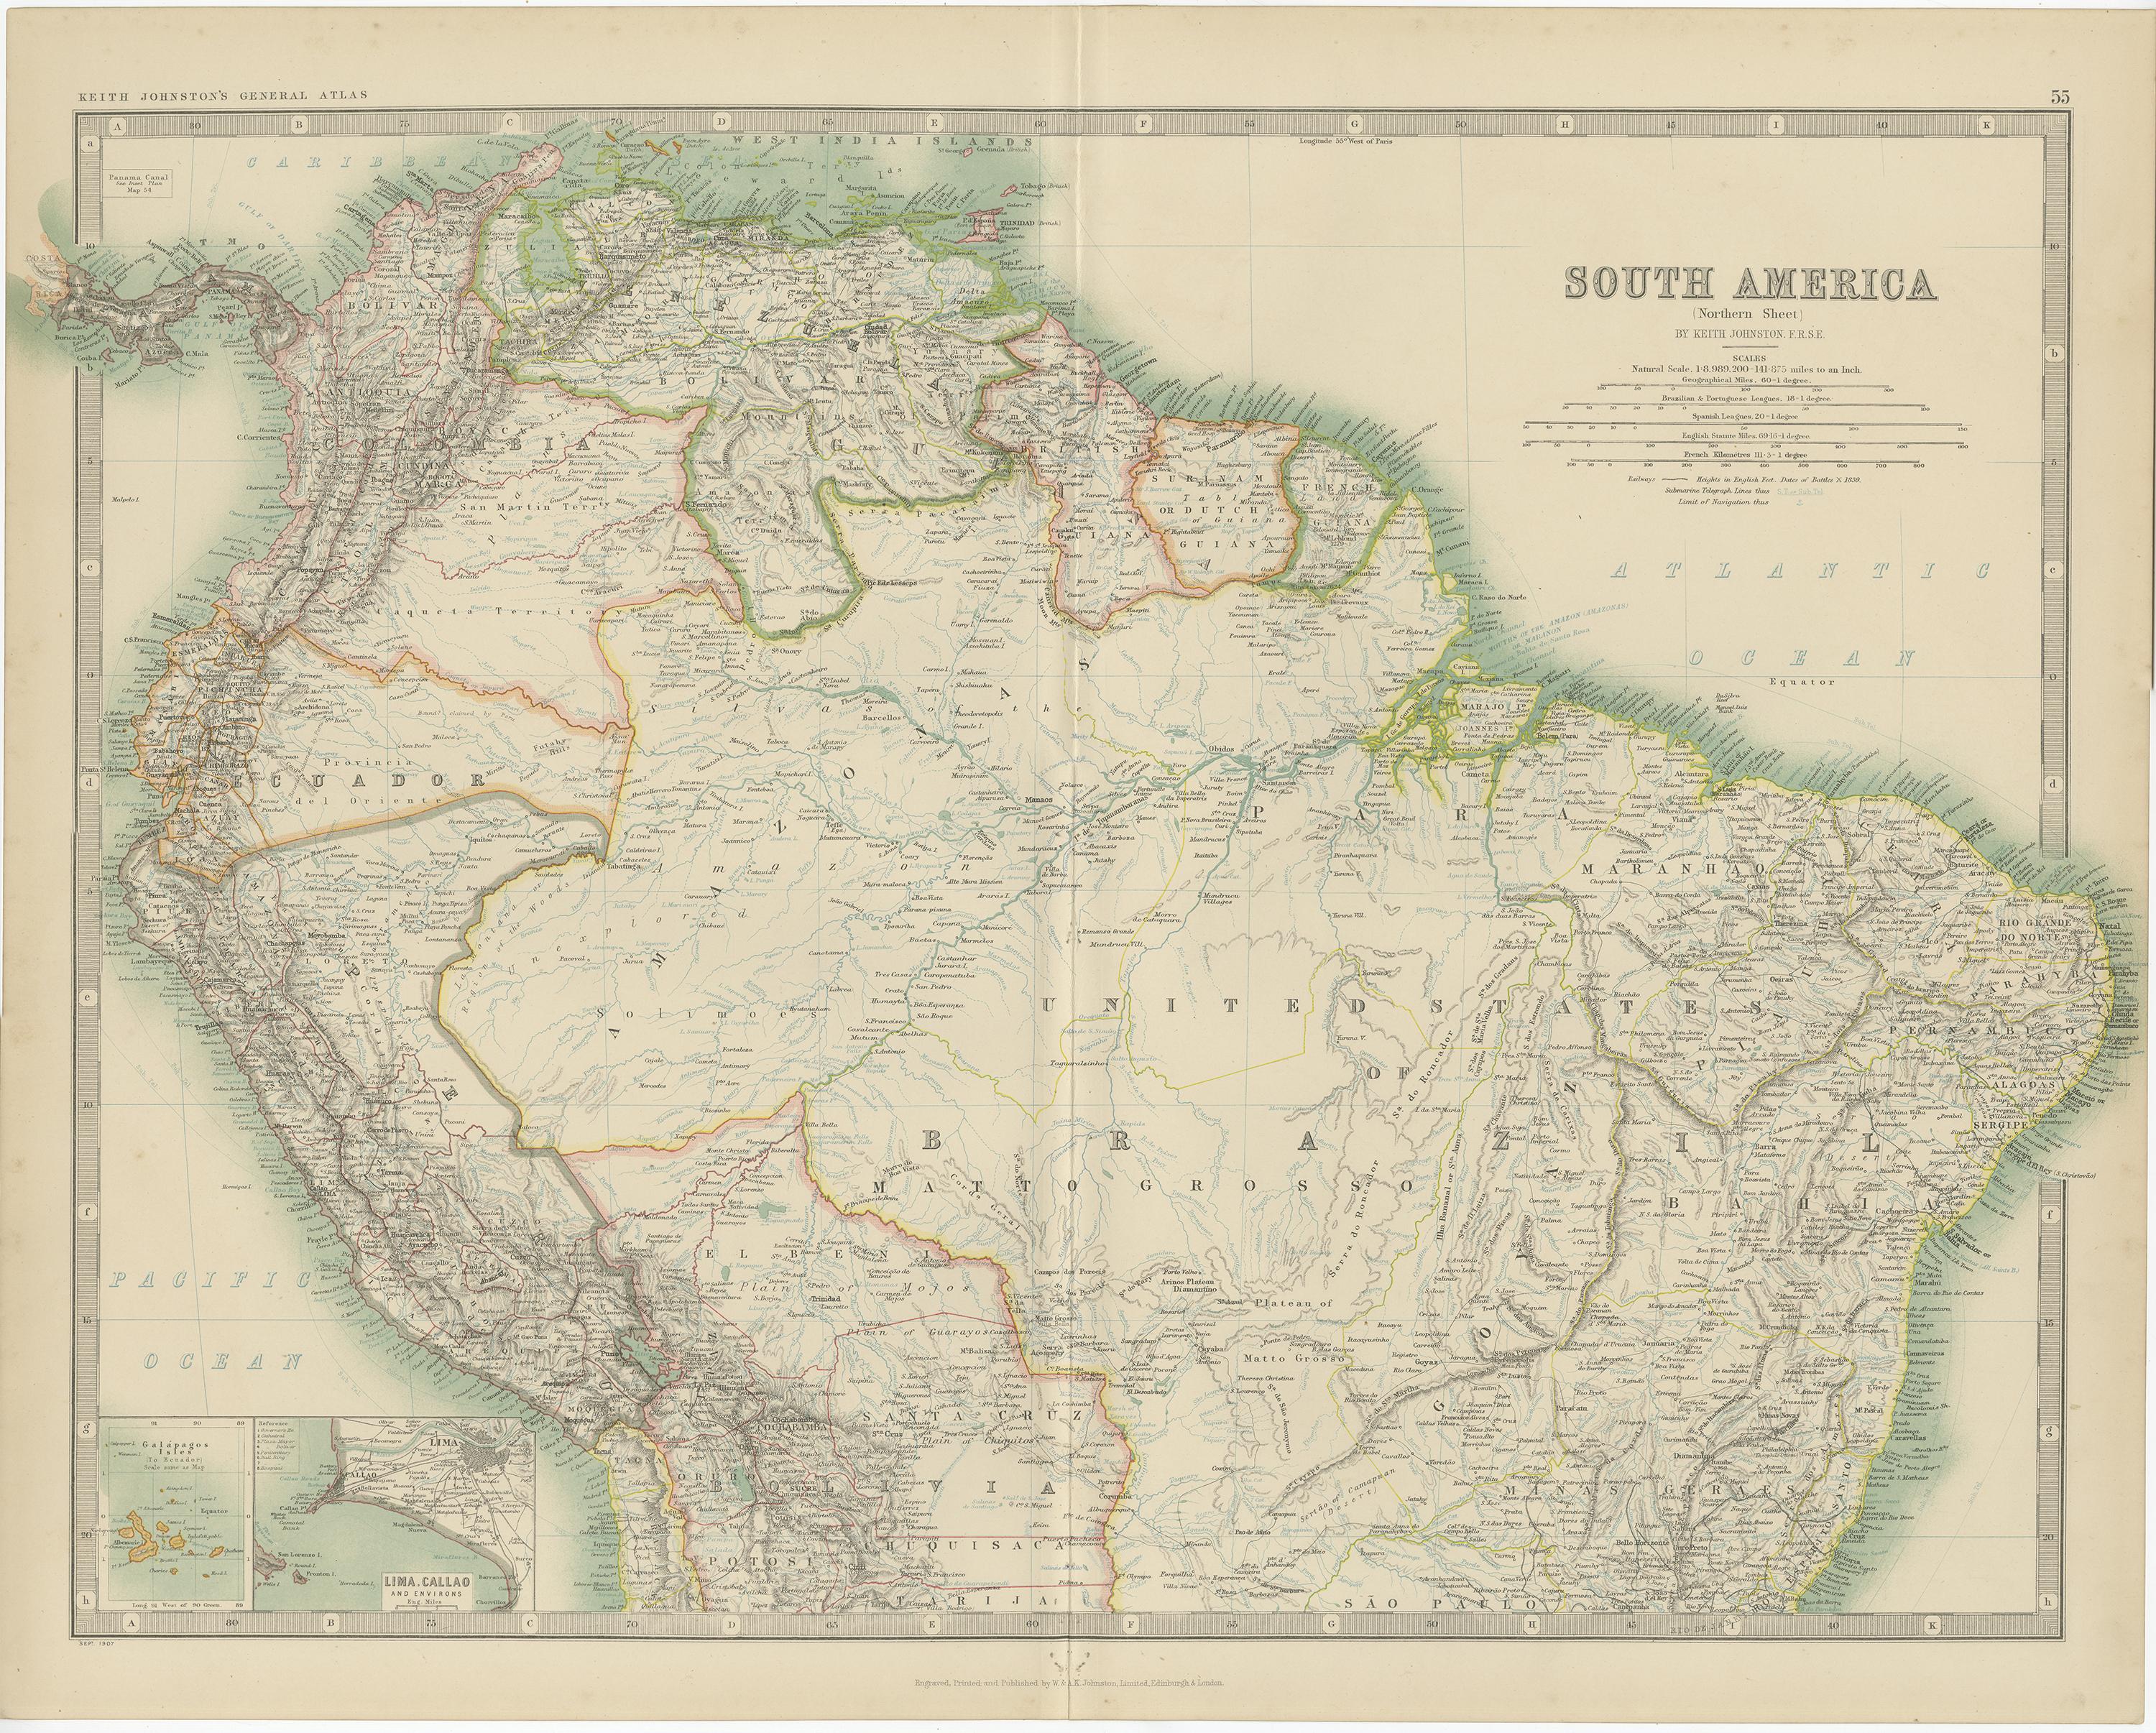 The antique map titled 'South America, Northern Sheet' is a historical cartographic representation of the northern part of South America. This original antique map features inset maps of the Galapagos Isles and Lima Callao. It is sourced from the